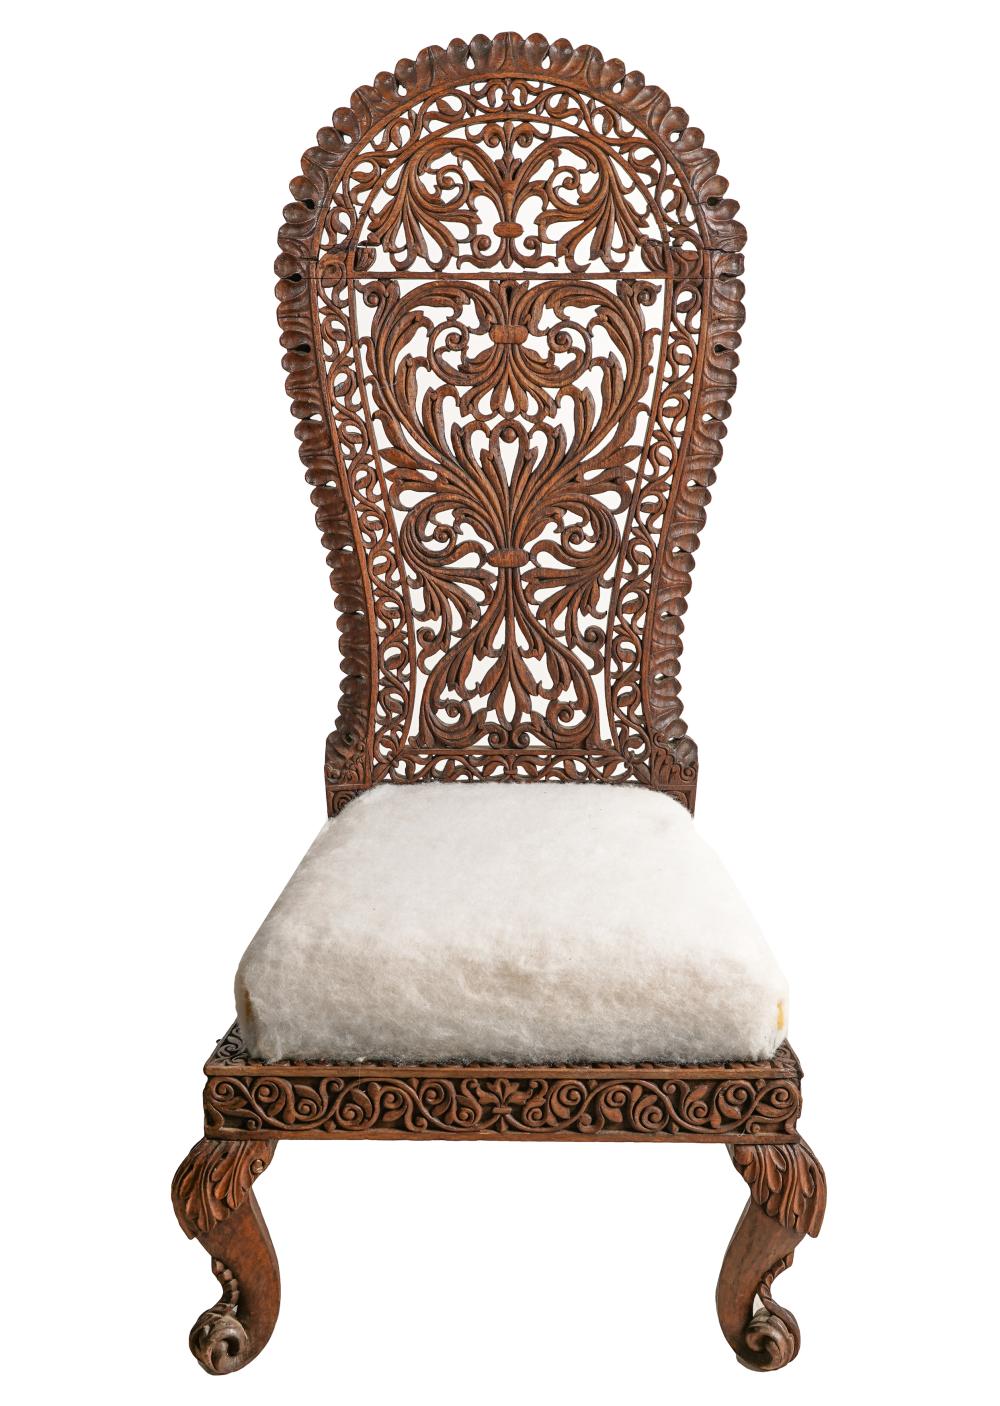 ANGLO-INDIAN CARVED LOW CHAIRwith